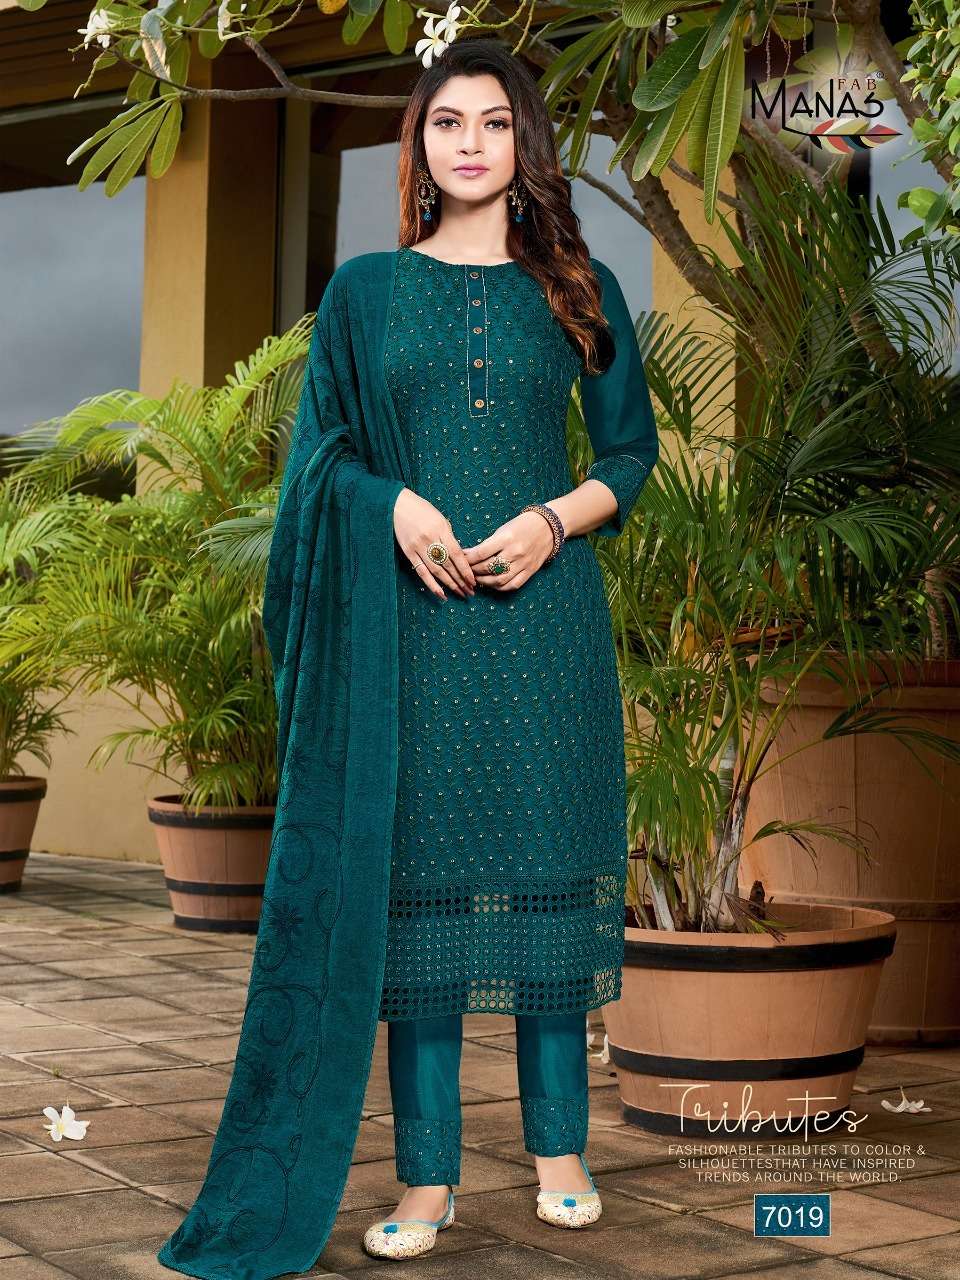 SCHIFFLI VOL-4 BY MANAS FAB 7019 TO 7024 SERIES BEAUTIFUL SUITS COLORFUL STYLISH FANCY CASUAL WEAR & ETHNIC WEAR GEORGETTE WITH SCHIFFLI WORK DRESSES AT WHOLESALE PRICE